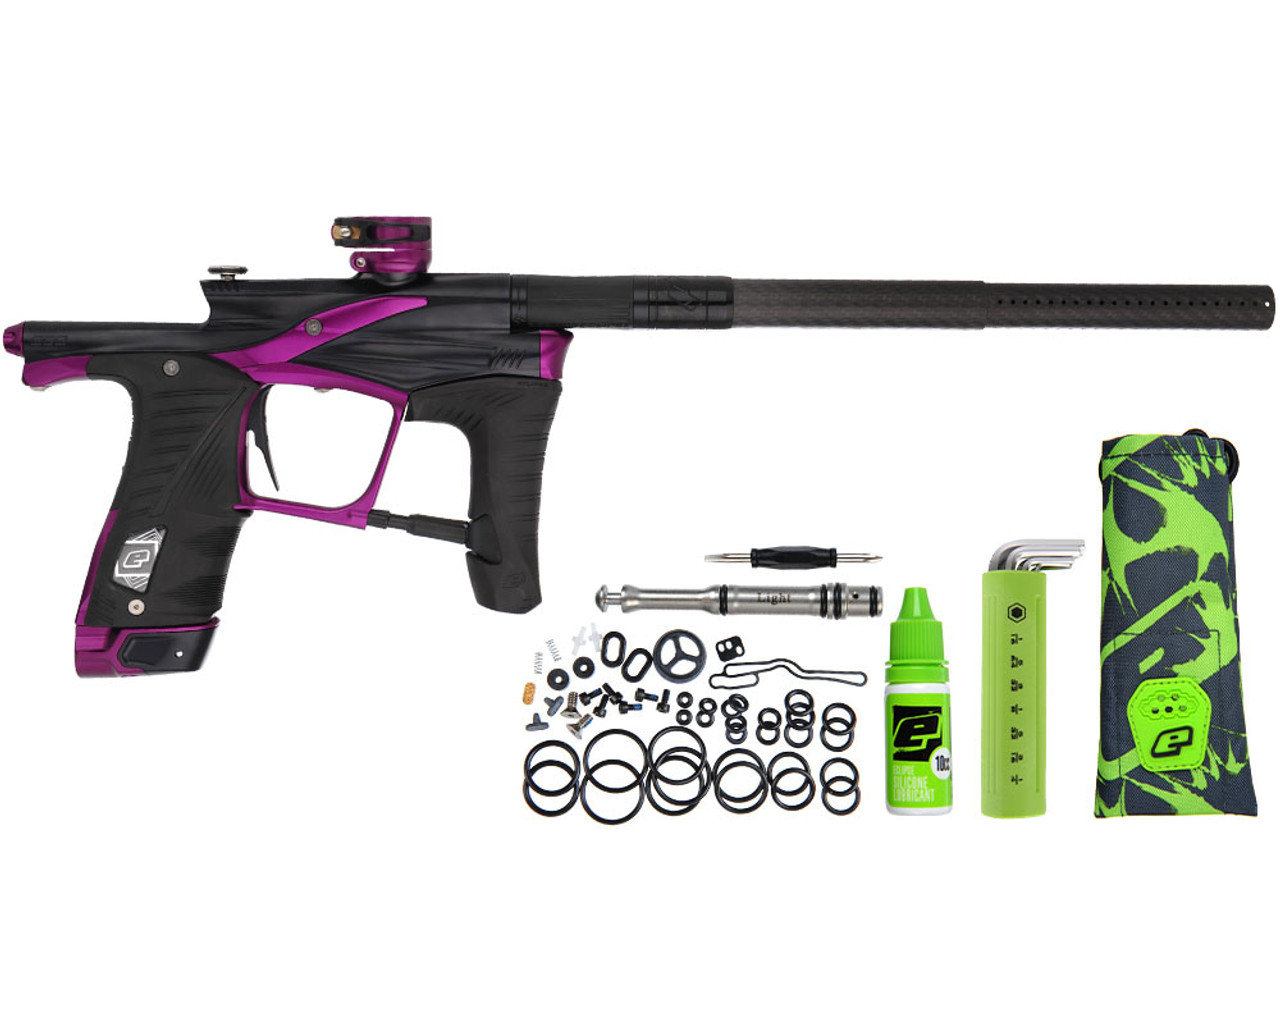  Planet Eclipse Ego LV1.6 Contender Paintball Gun Package Kit  (Amethyst, Tank Size: 48/4500) : Sports & Outdoors